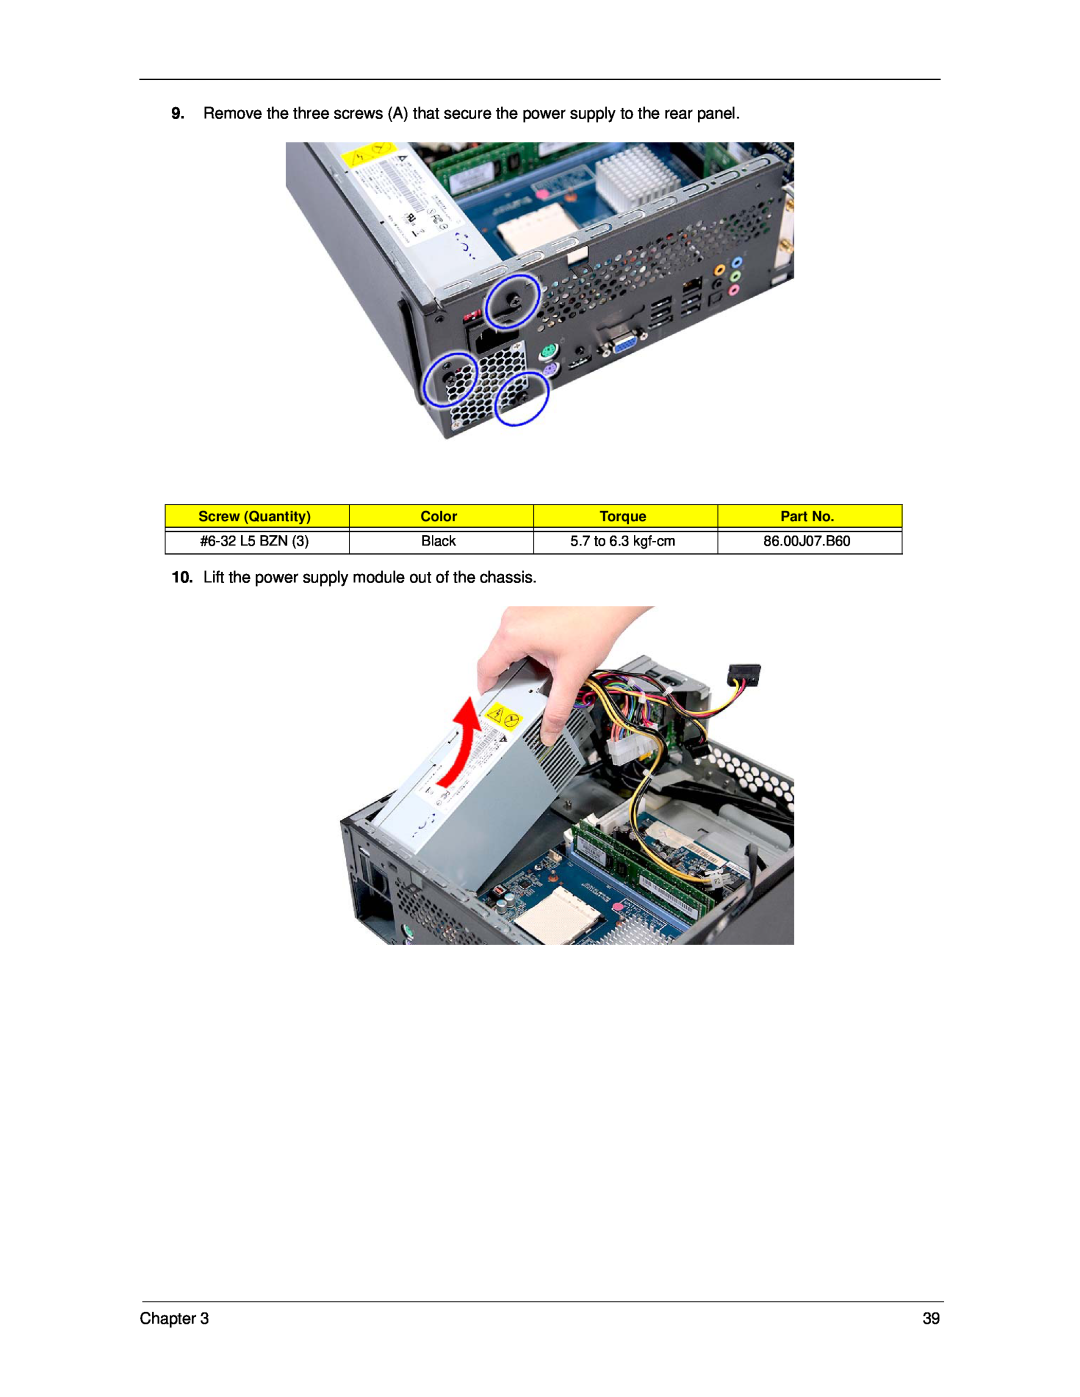 Acer X5300 Lift the power supply module out of the chassis, Chapter, Screw Quantity, Color, Torque, #6-32 L5 BZN, Black 